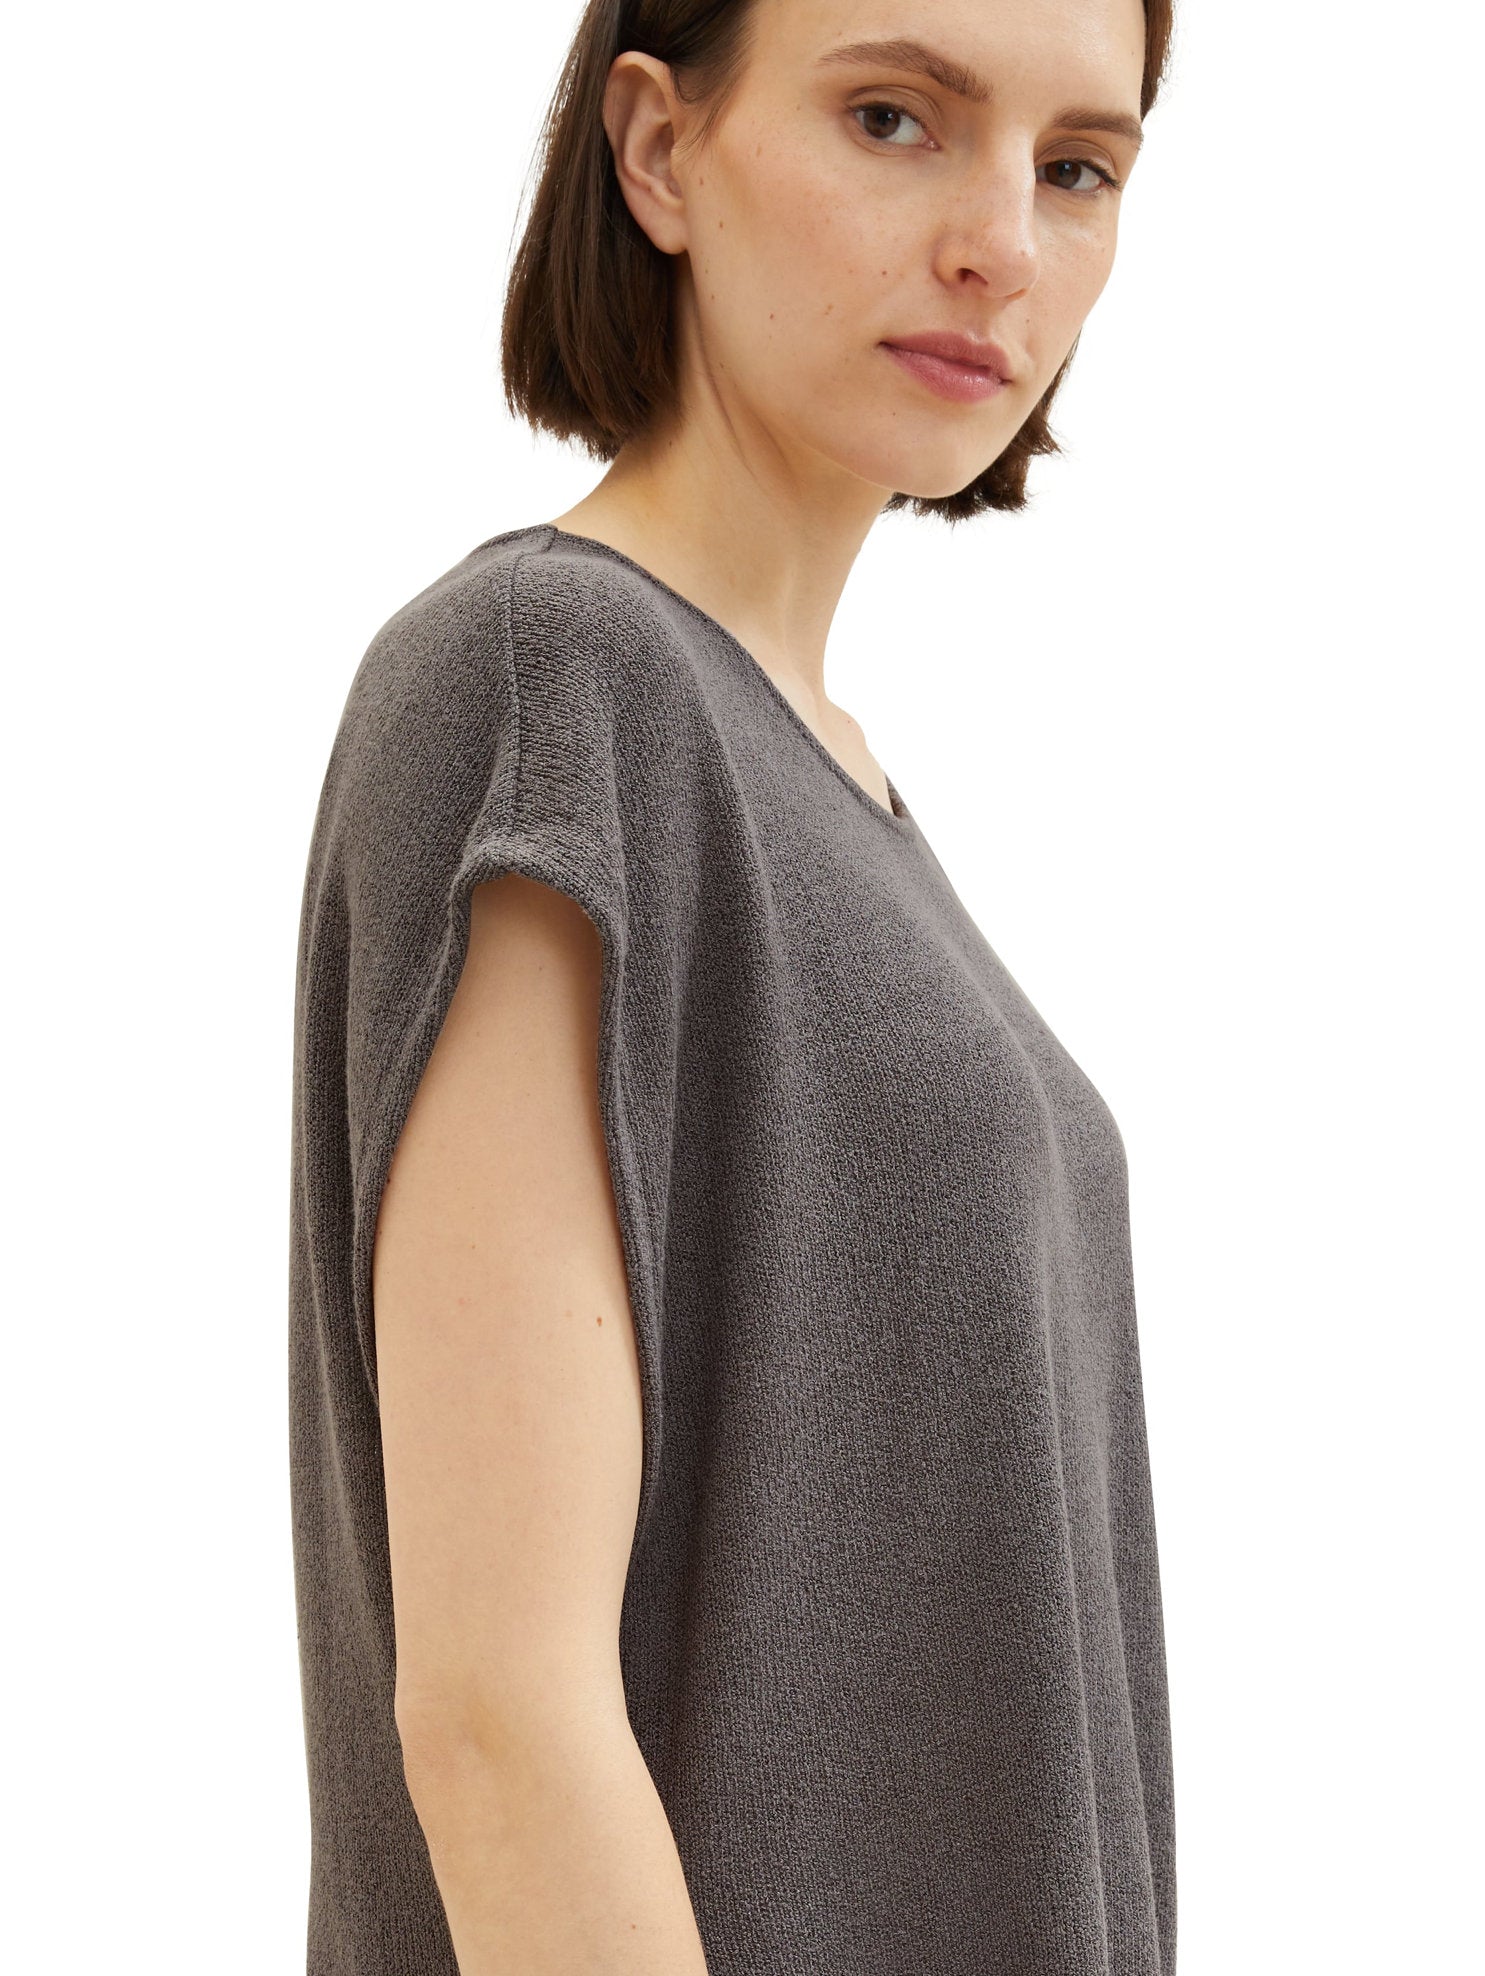 Blouse With Cap Sleeve_1038726_32251_05